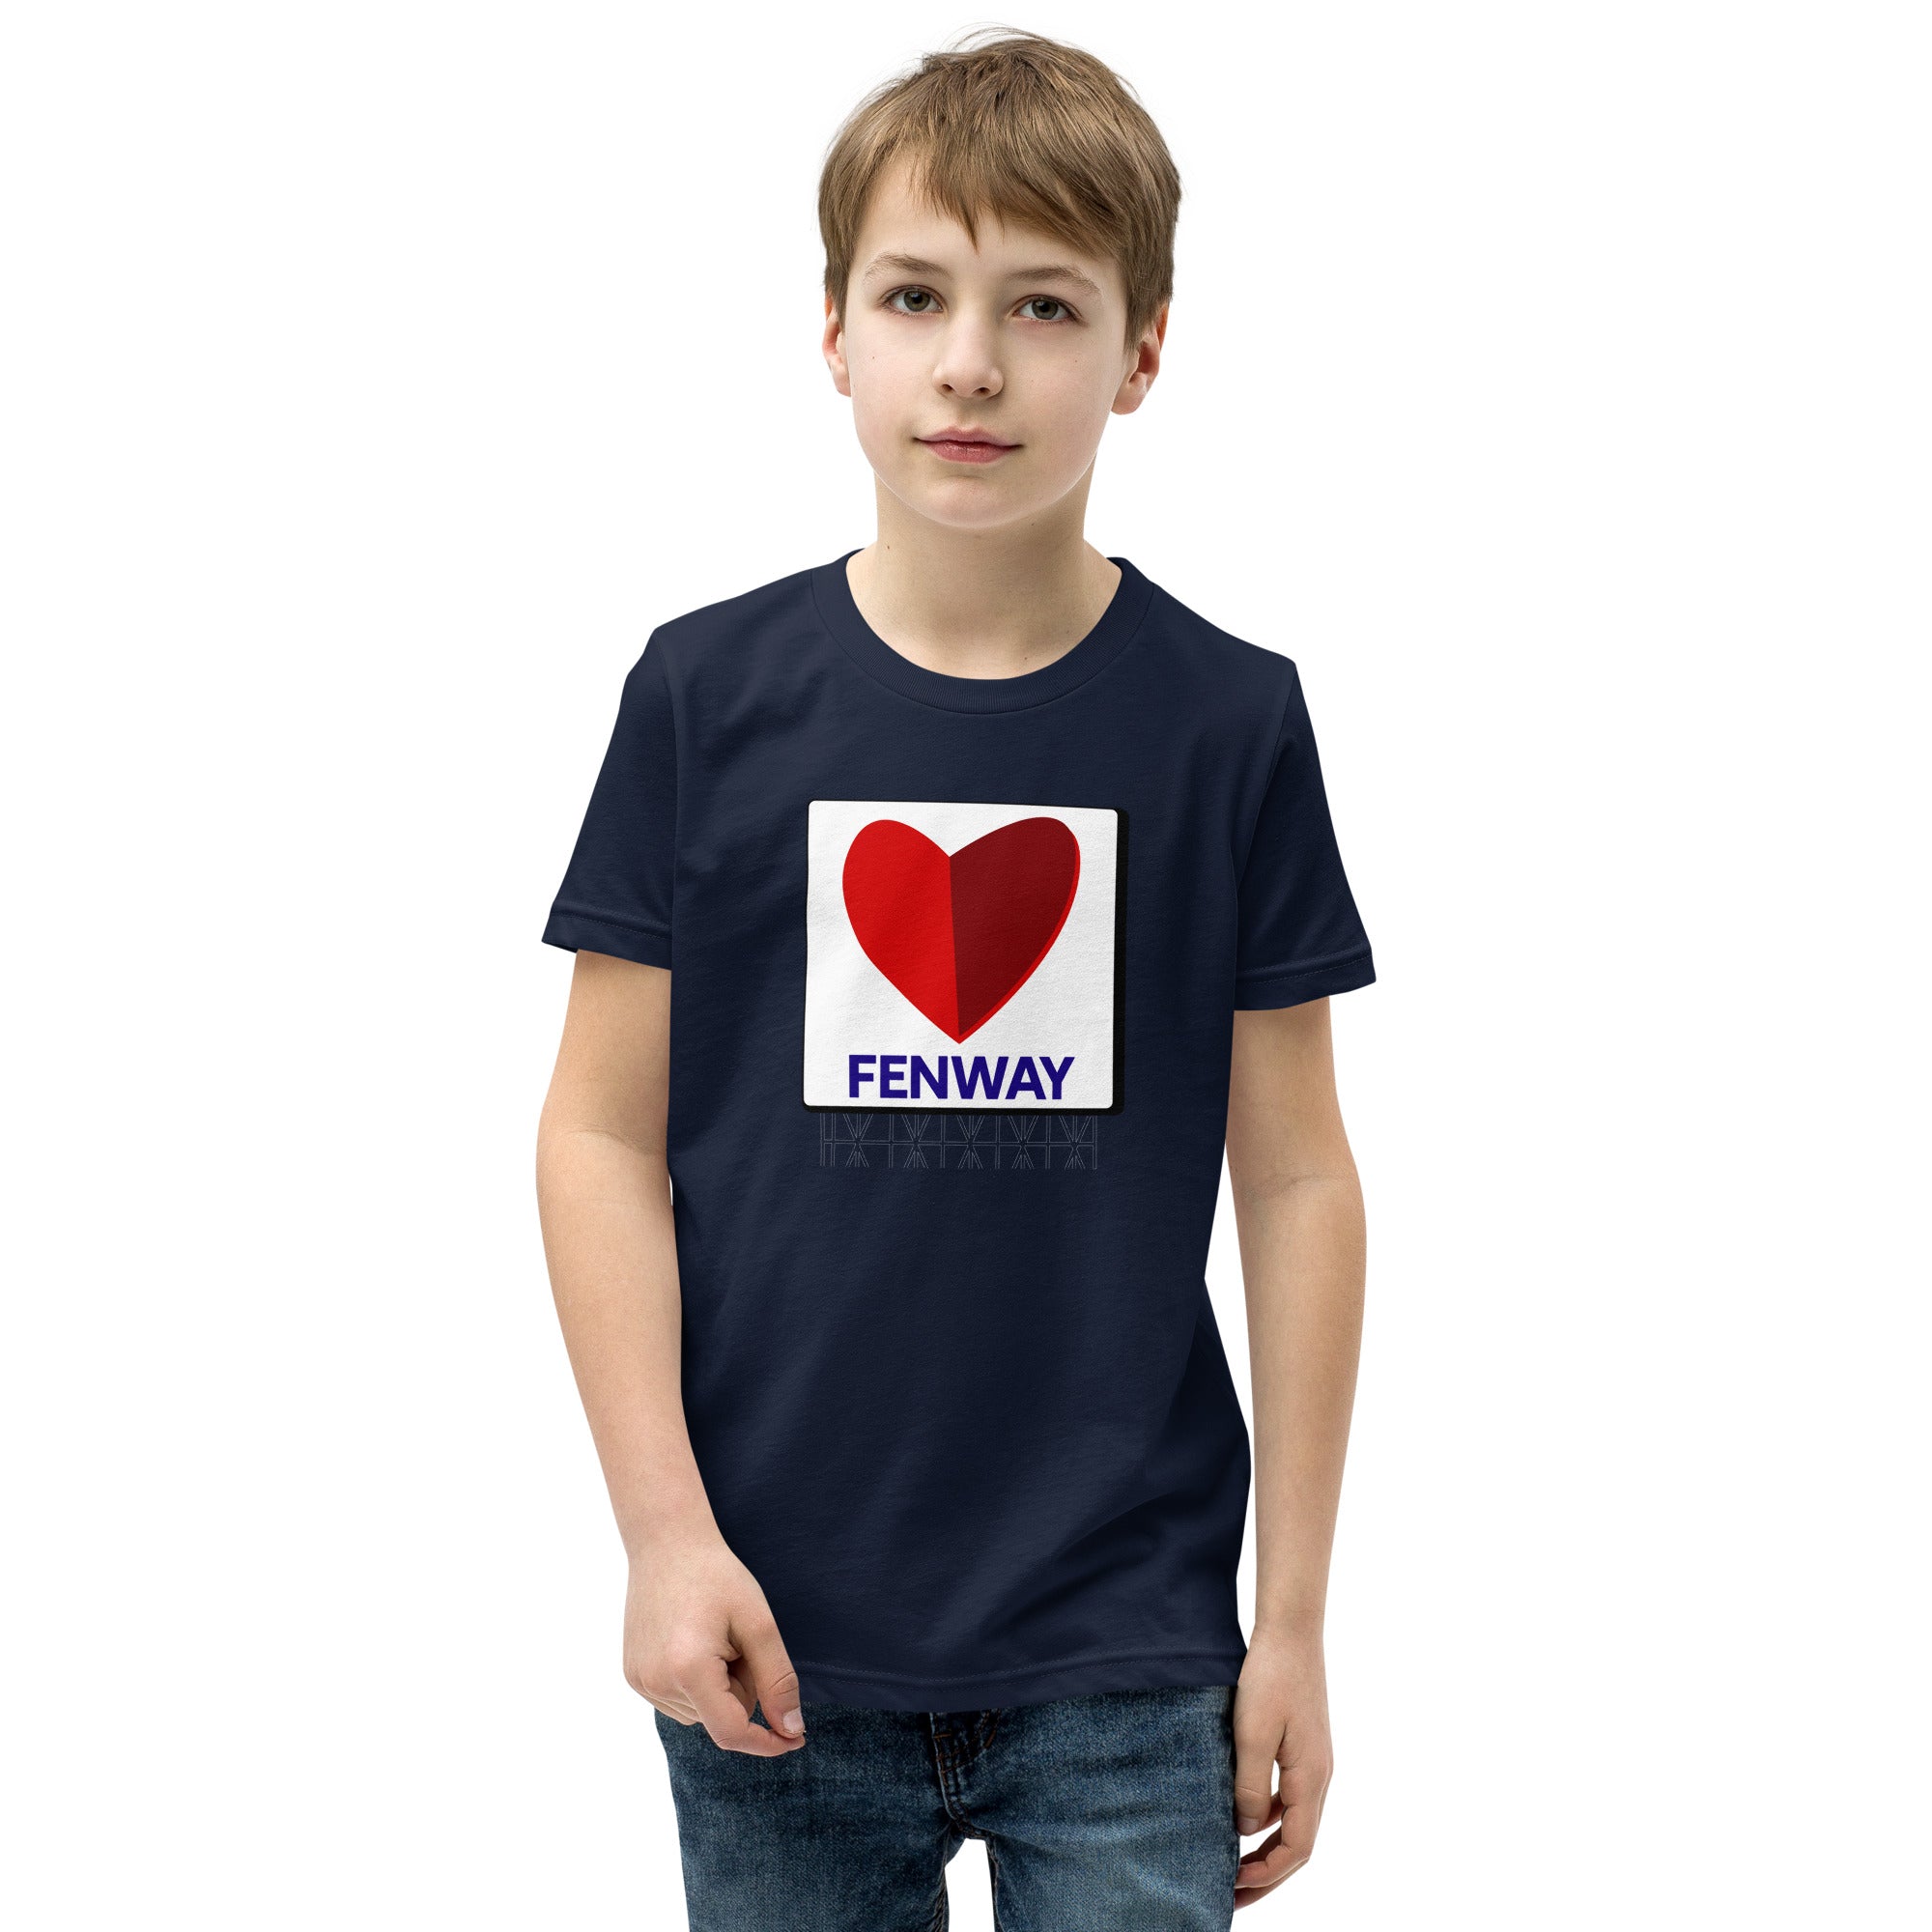 photo of boy wearing a navy blue t-shirt with graphic of the citgo sign boston fenway as a heart